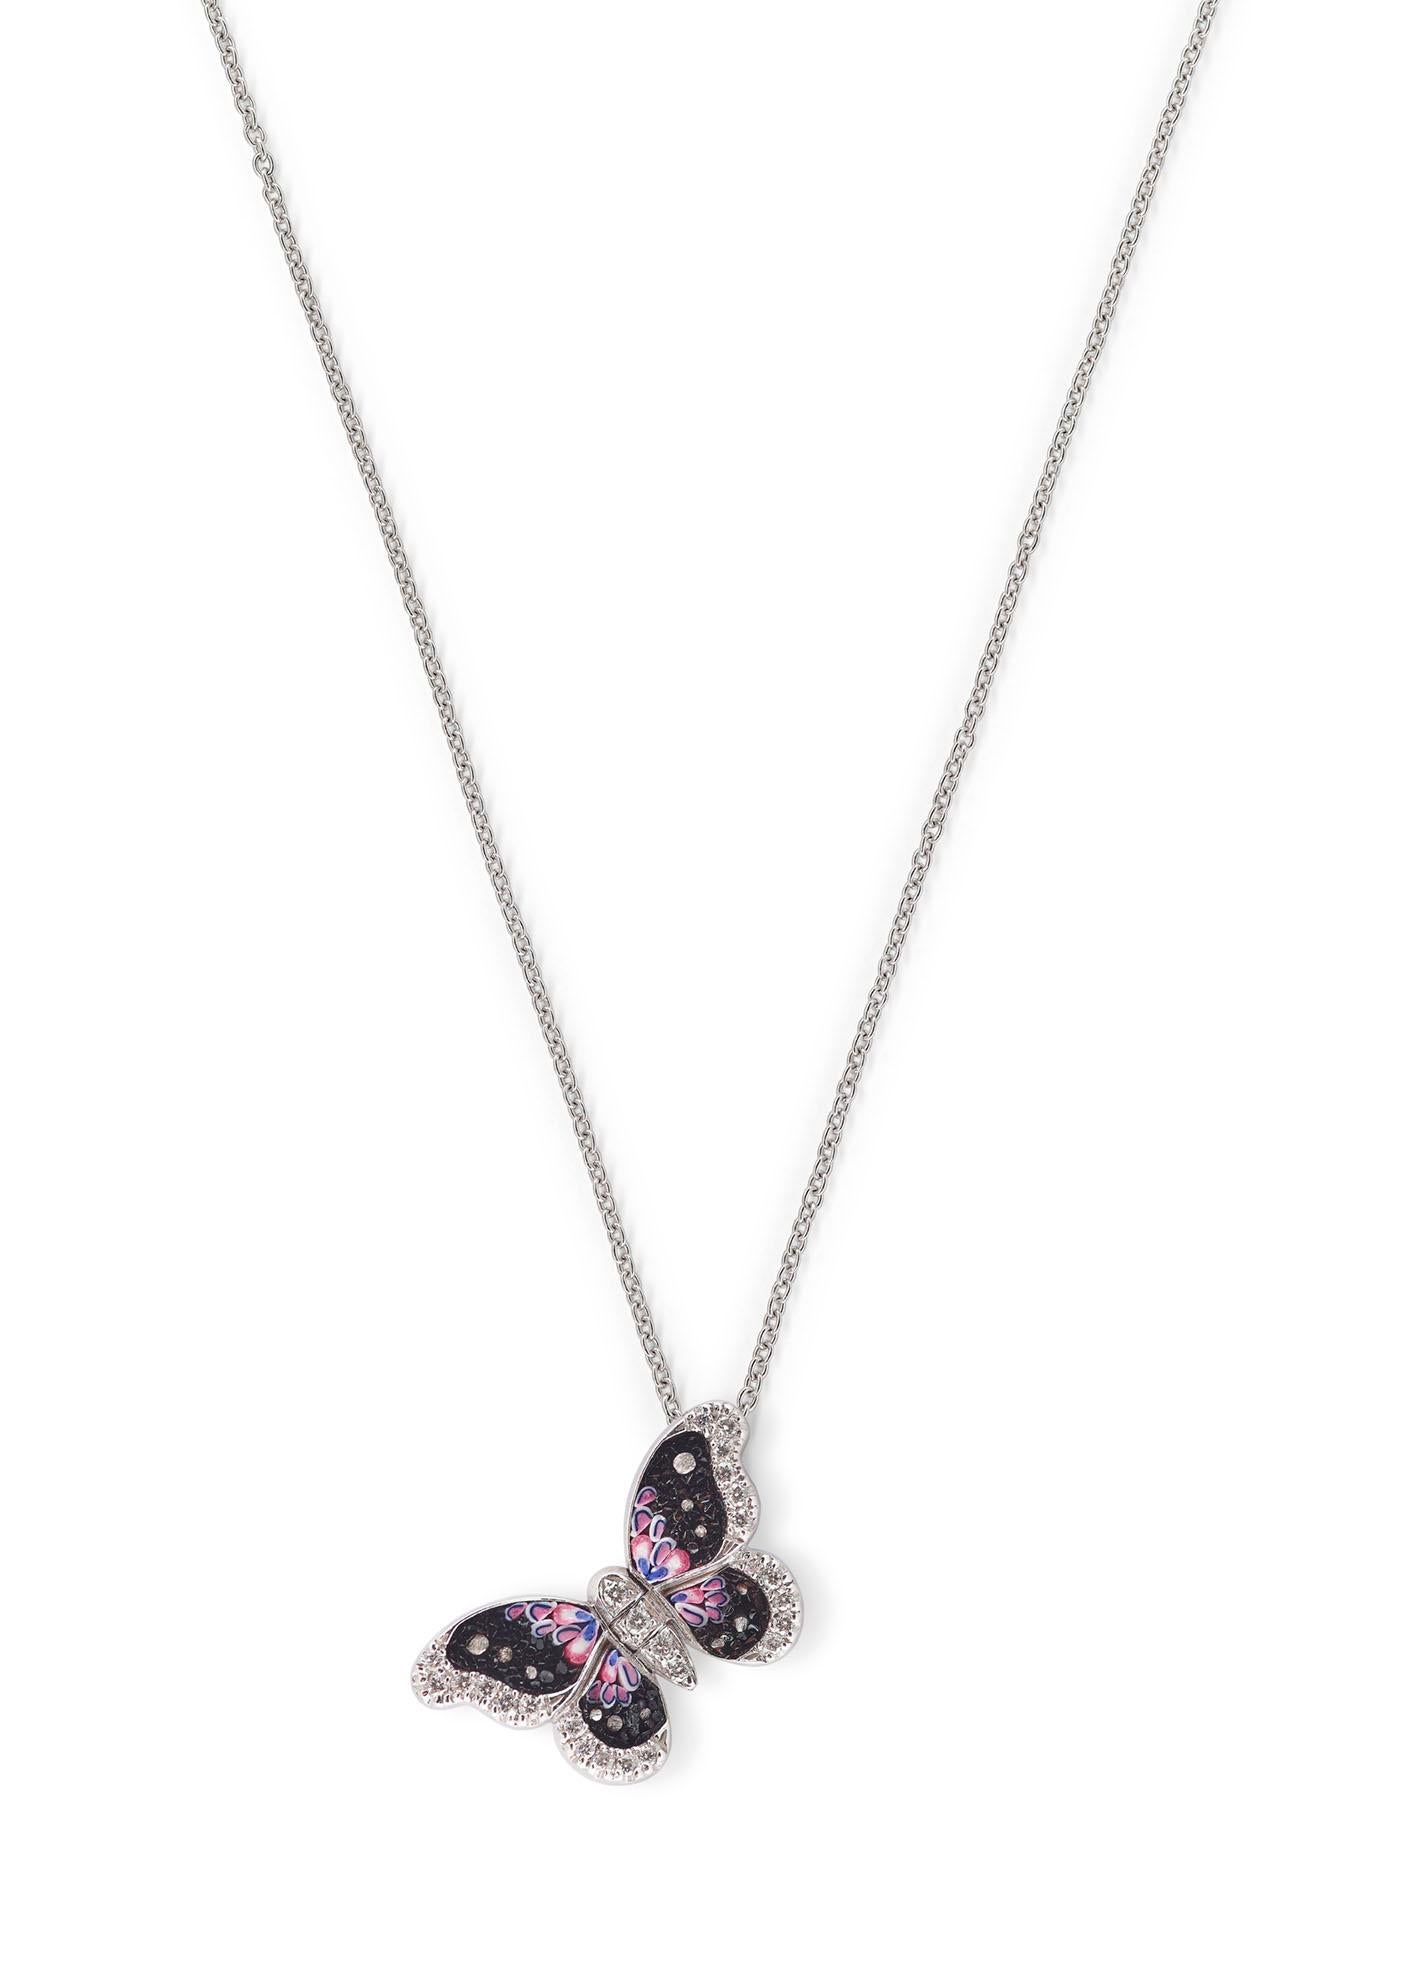 Romantic Stylish Necklace White Gold White Diamonds Hand Decorated with Micro Mosaic For Sale